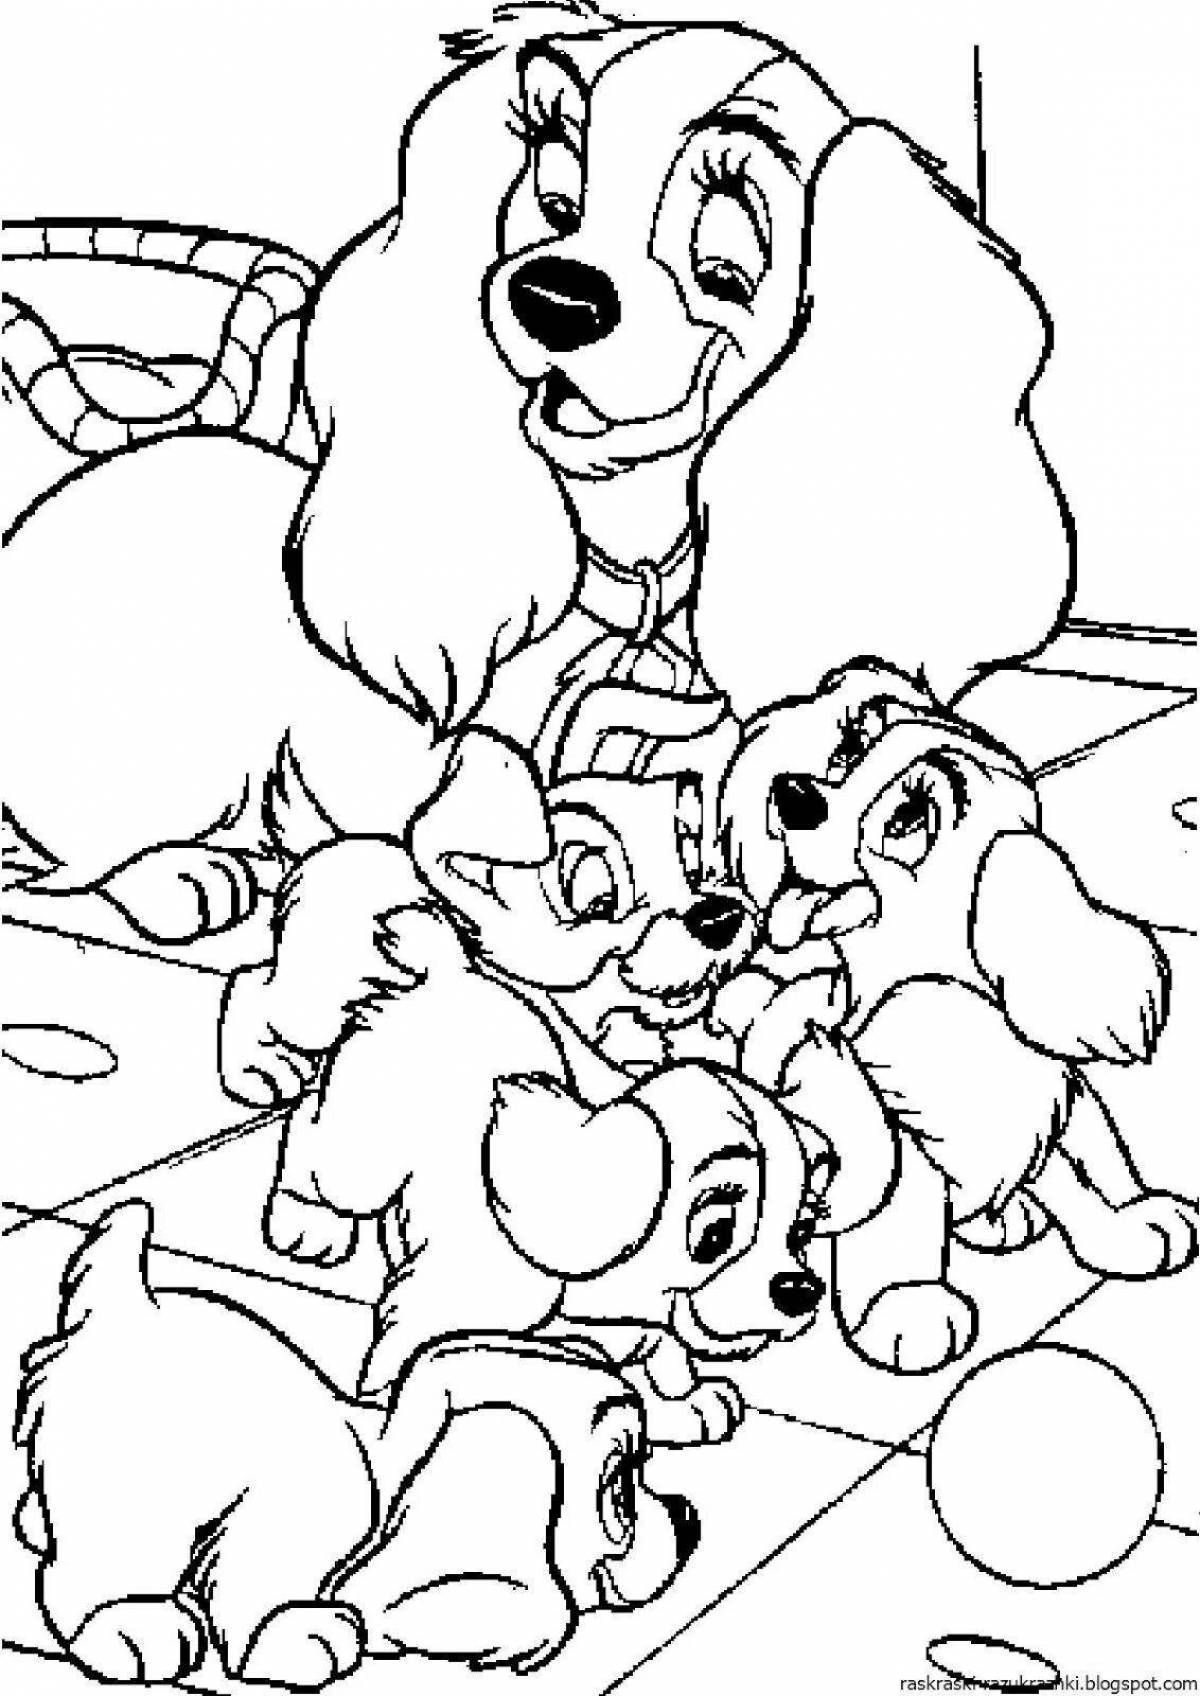 Attractive dog family coloring page